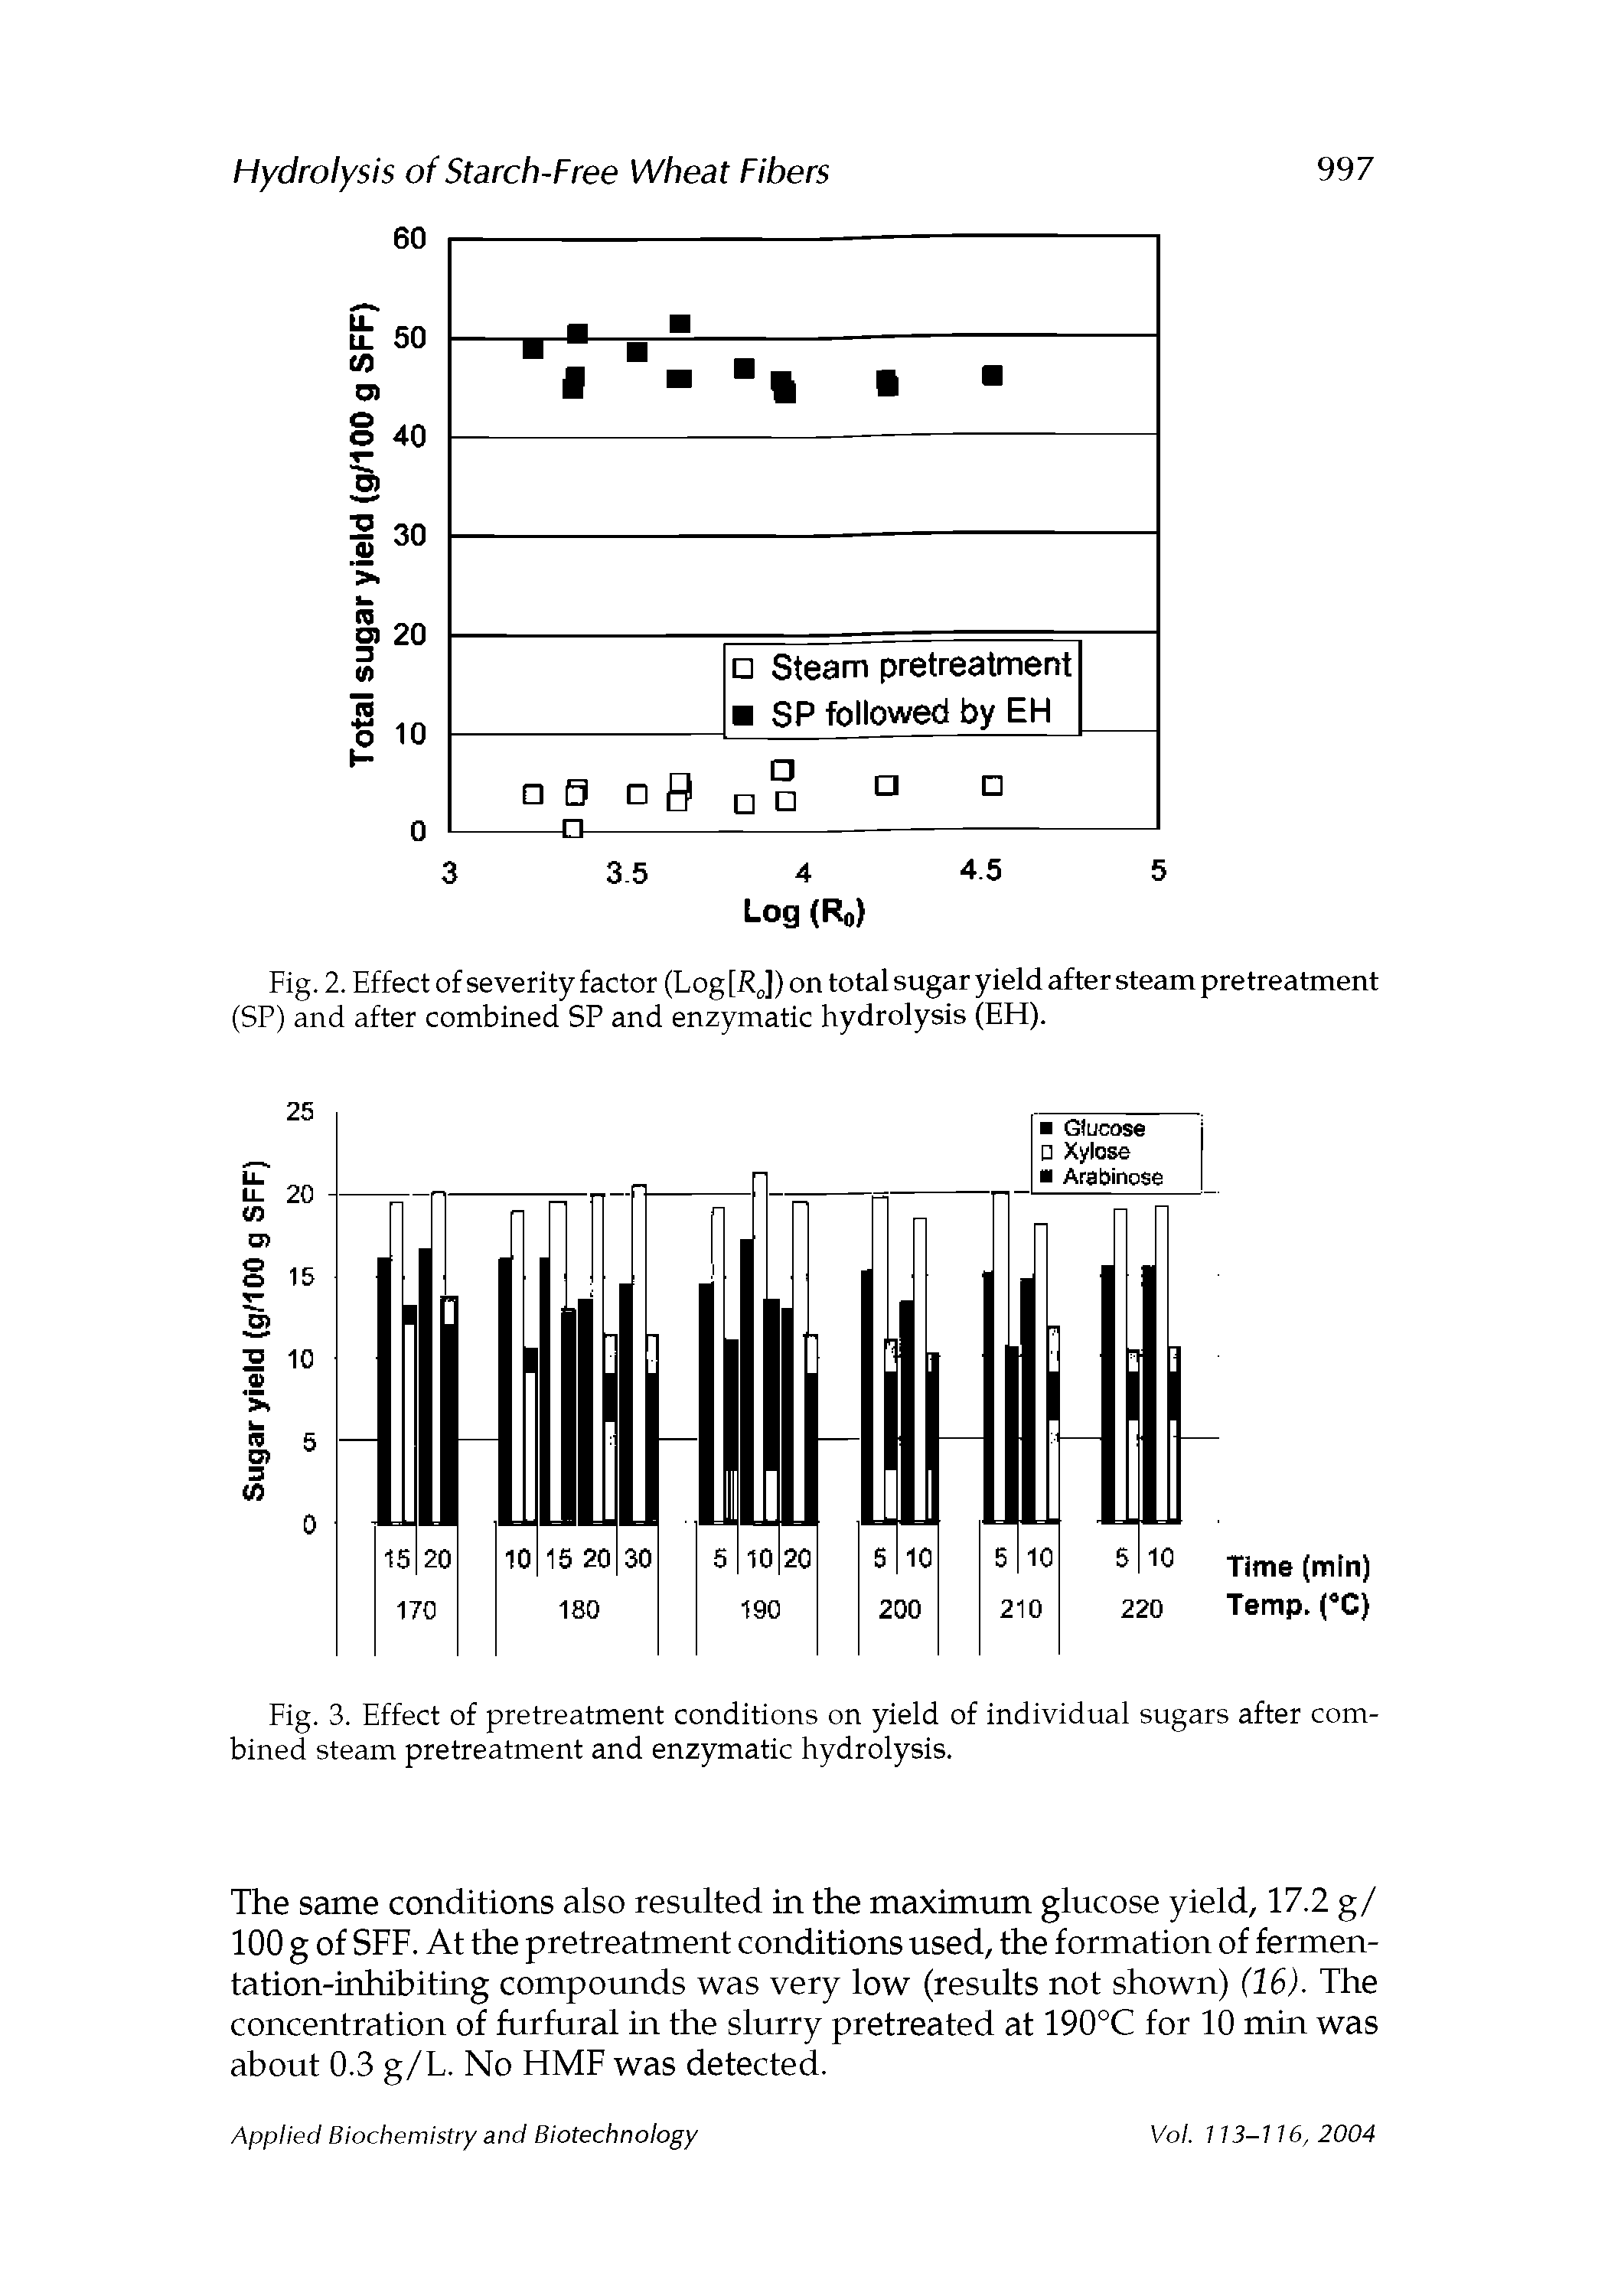 Fig. 3. Effect of pretreatment conditions on yield of individual sugars after combined steam pretreatment and enzymatic hydrolysis.